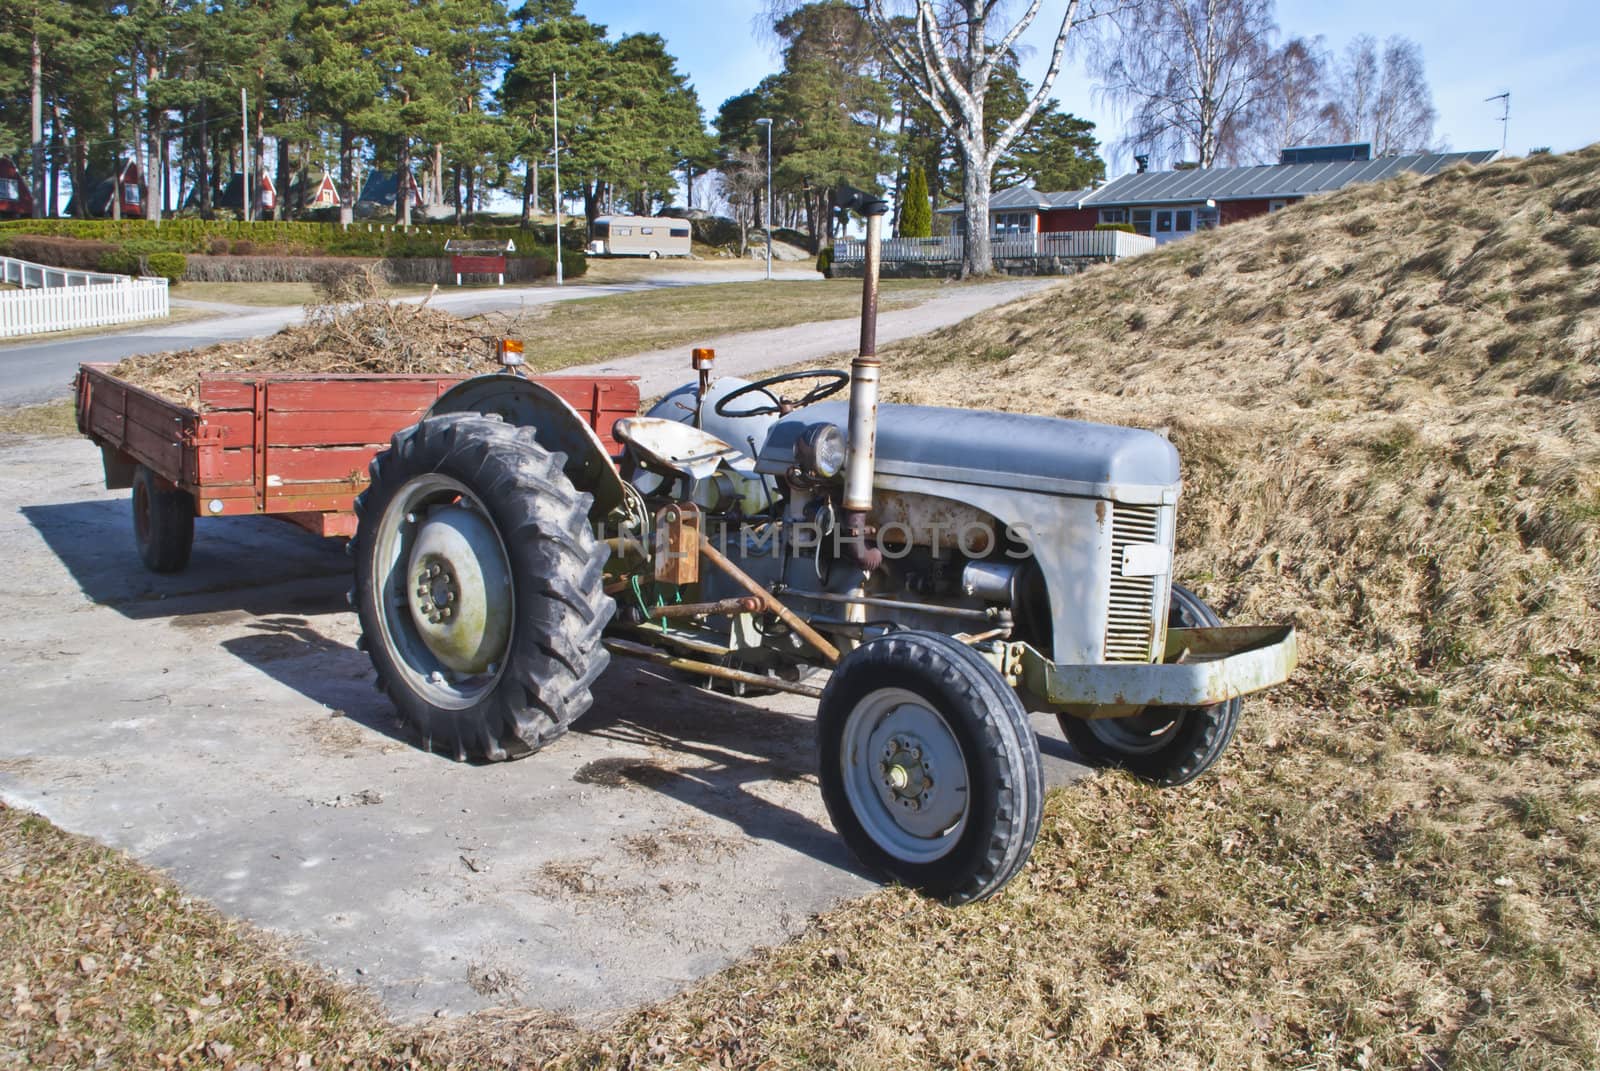 TE20, (in Norway called gråtass  "Fergie"), is a British Ferguson tractor that came on the market shortly after World War II. The tractor in the picture is shot at Fredriksten fortress in Halden and rolling still okay. Not sure but I think the tractor must be from the early 50s.